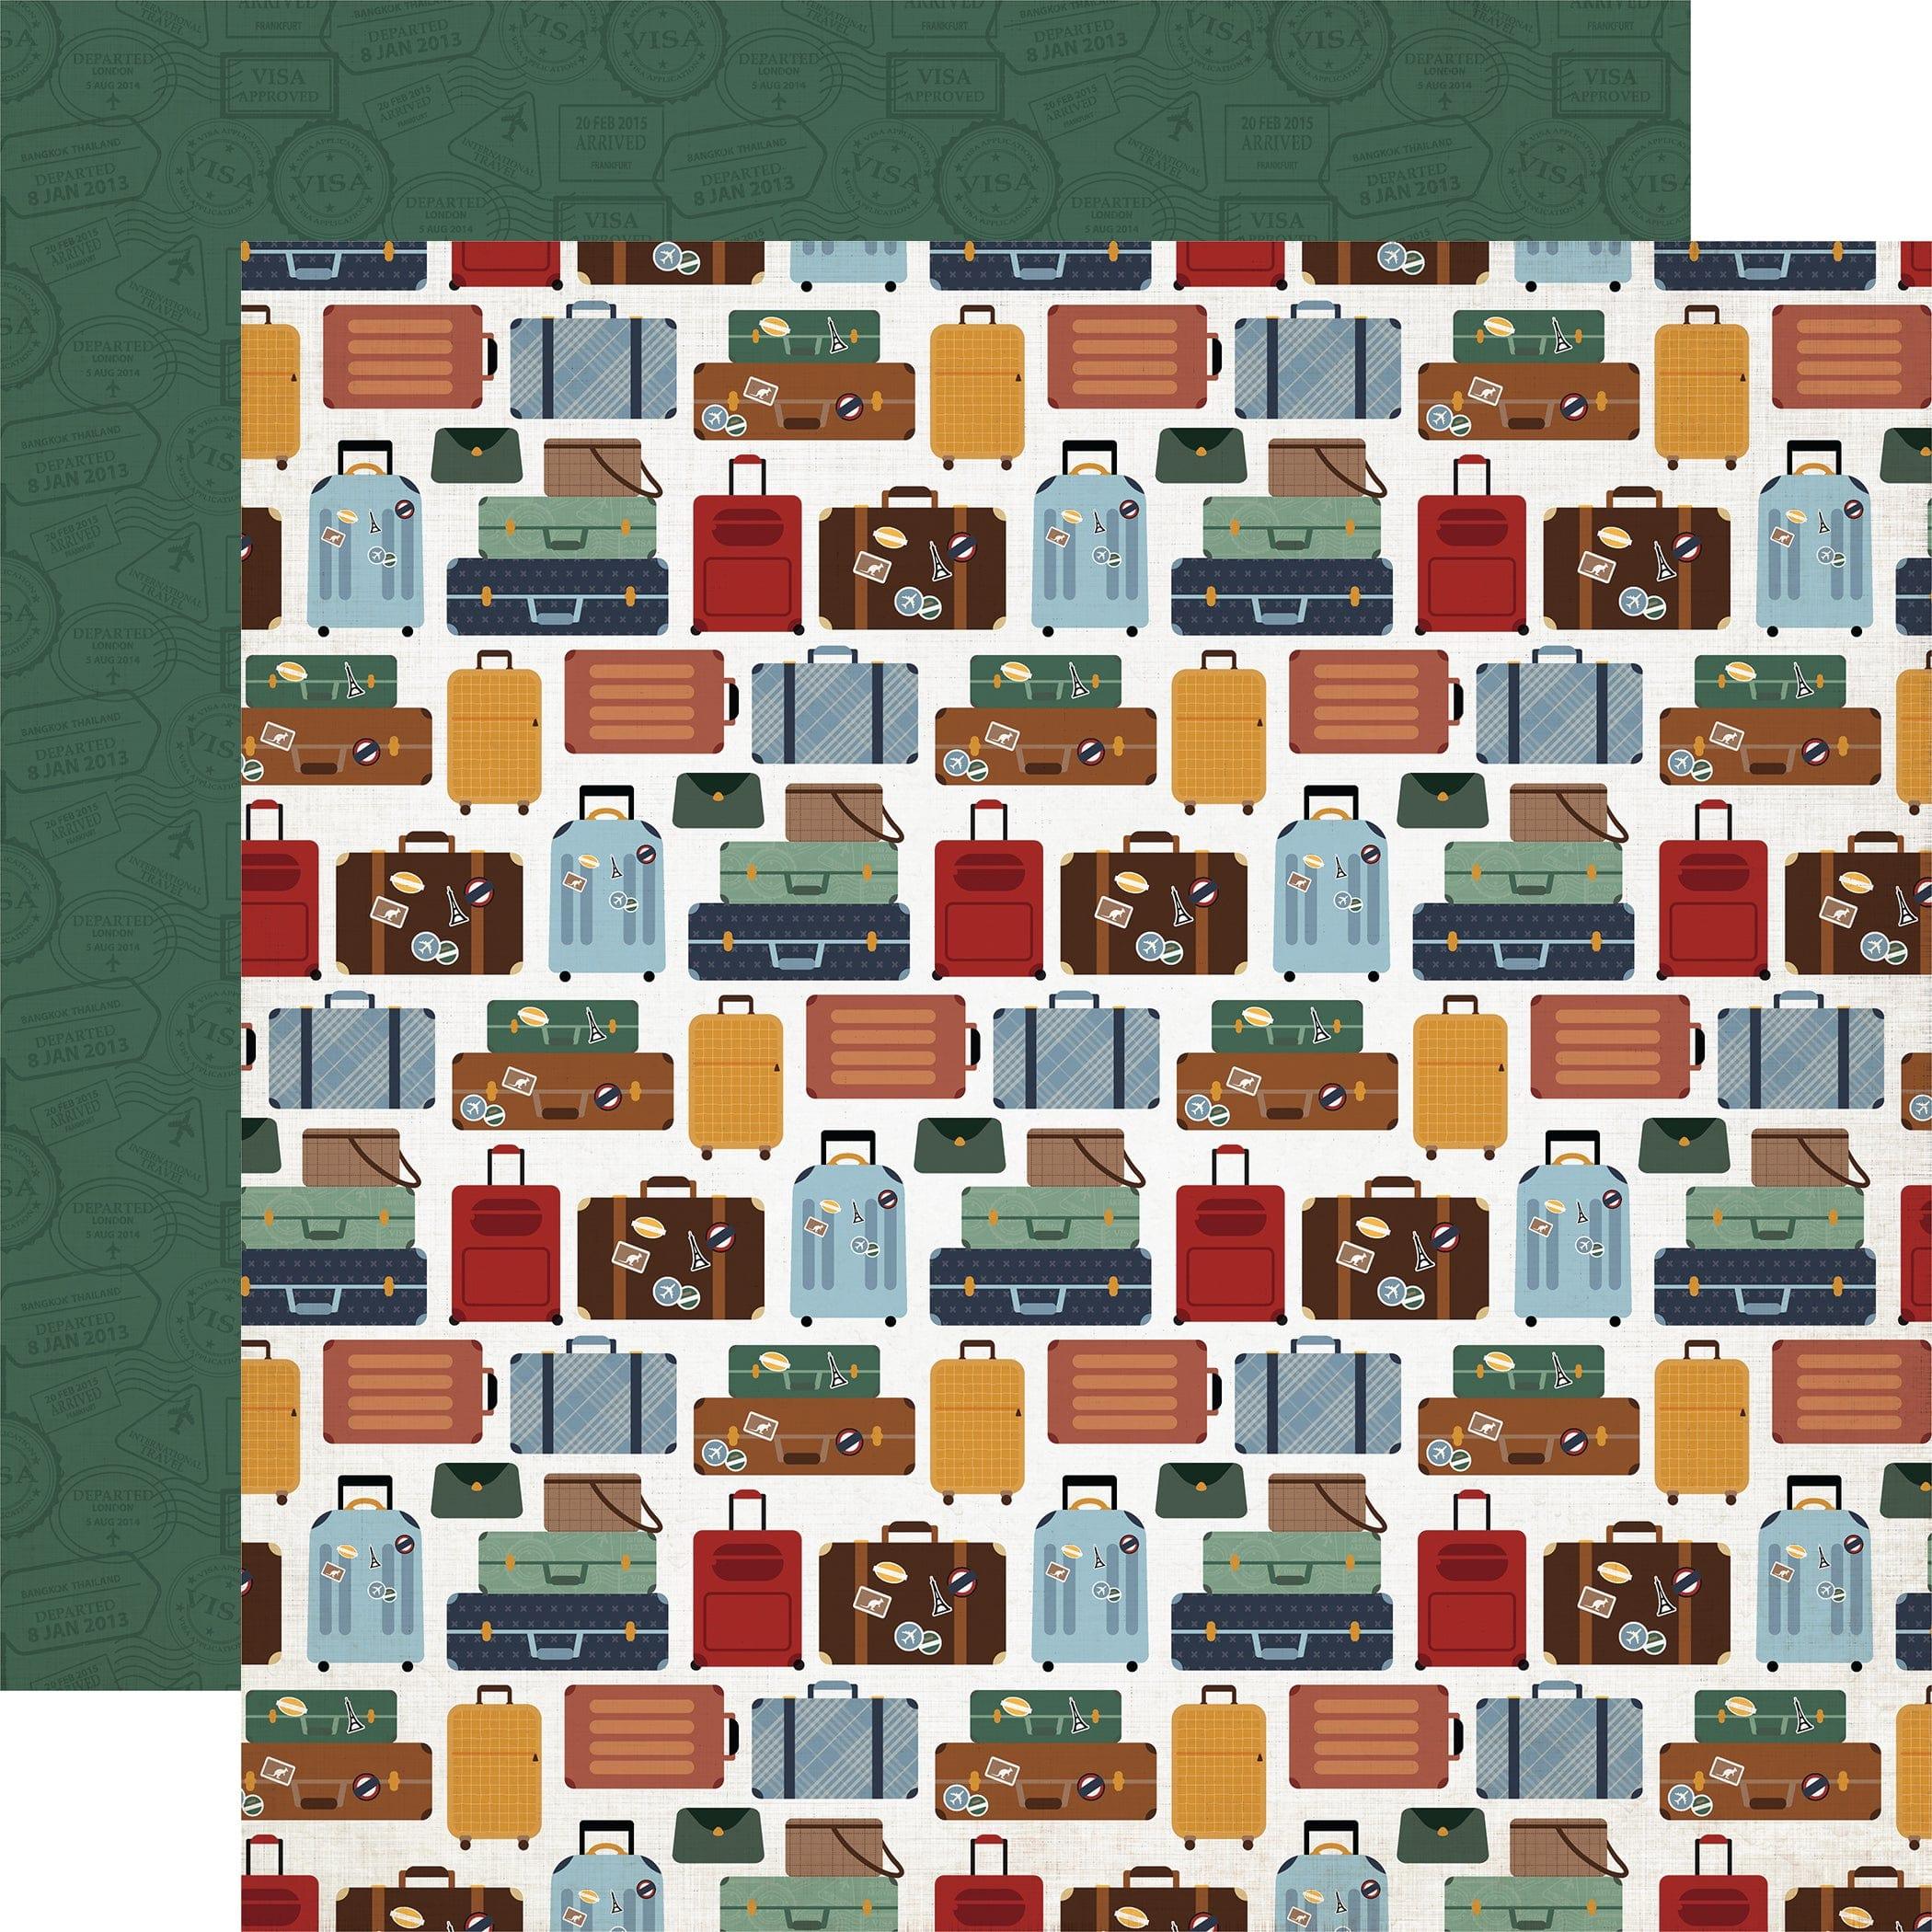 Let's Go Travel Collection Layover Luggage 12 x 12 Double-Sided Scrapbook Paper by Echo Park Paper